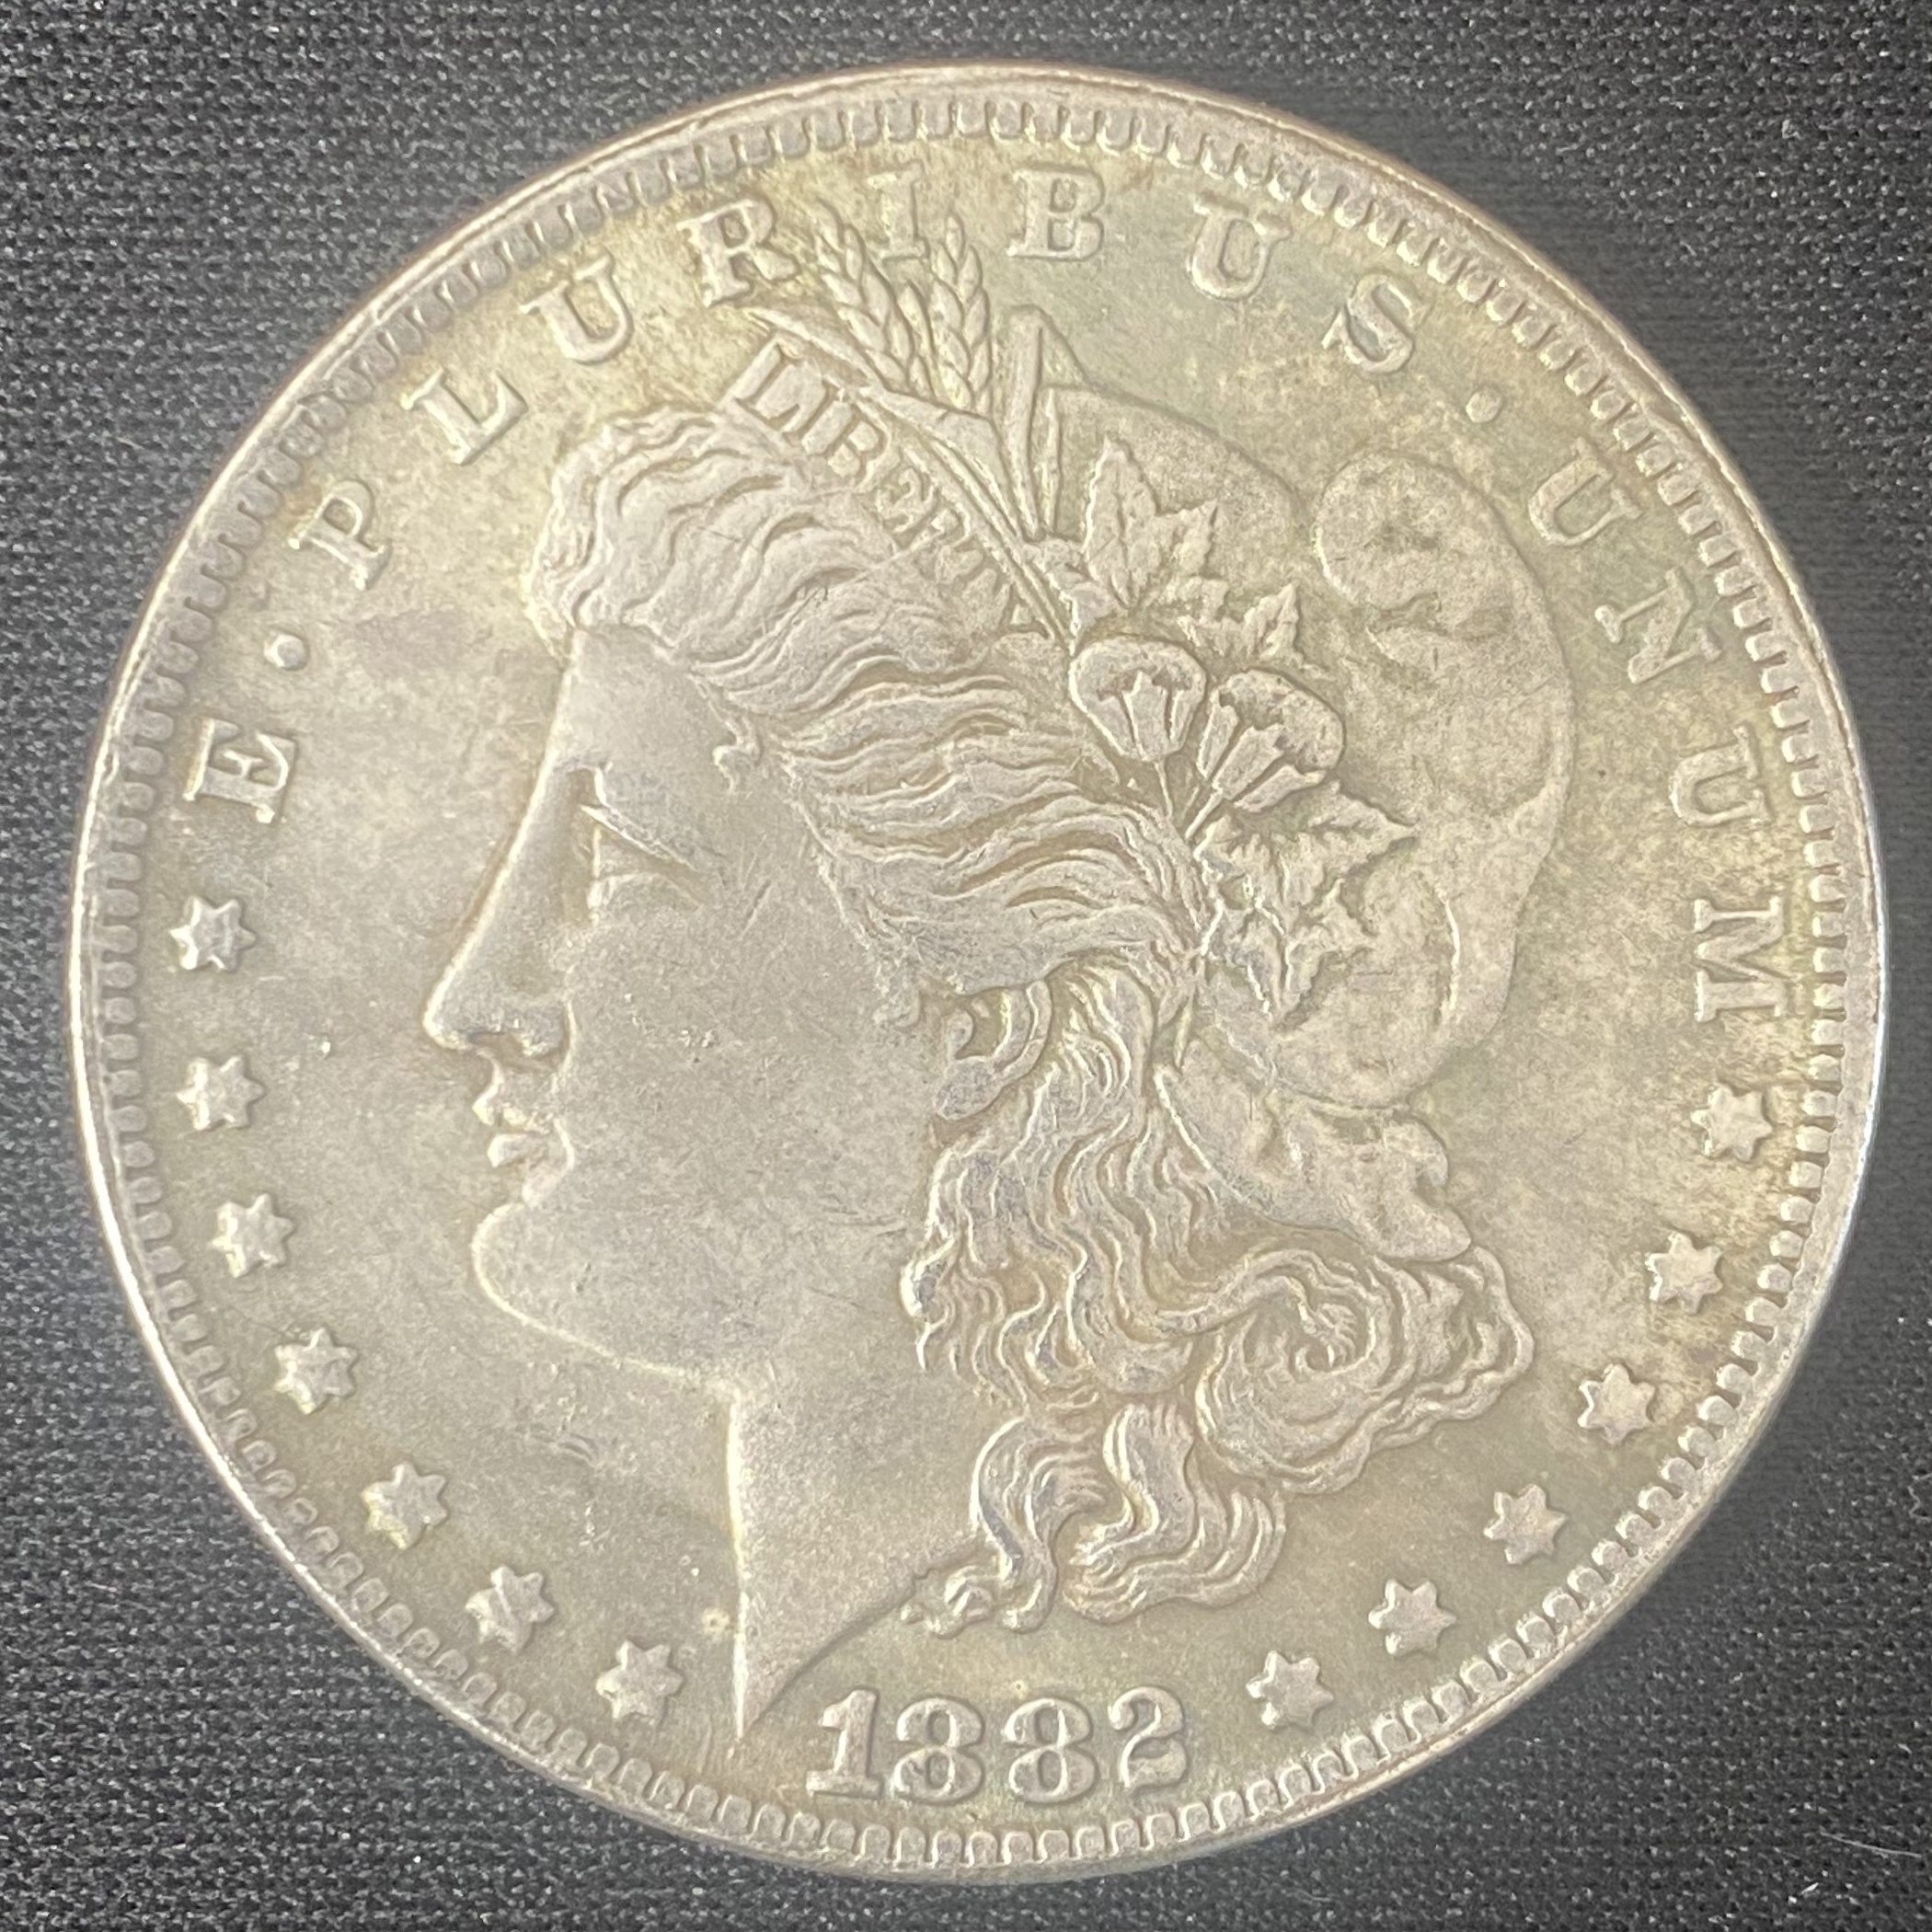 

1pc 1882 Morgan Dollar Antique Commemorative Coin, Slivery Collection Coin, Gifts Adults Collector,replica